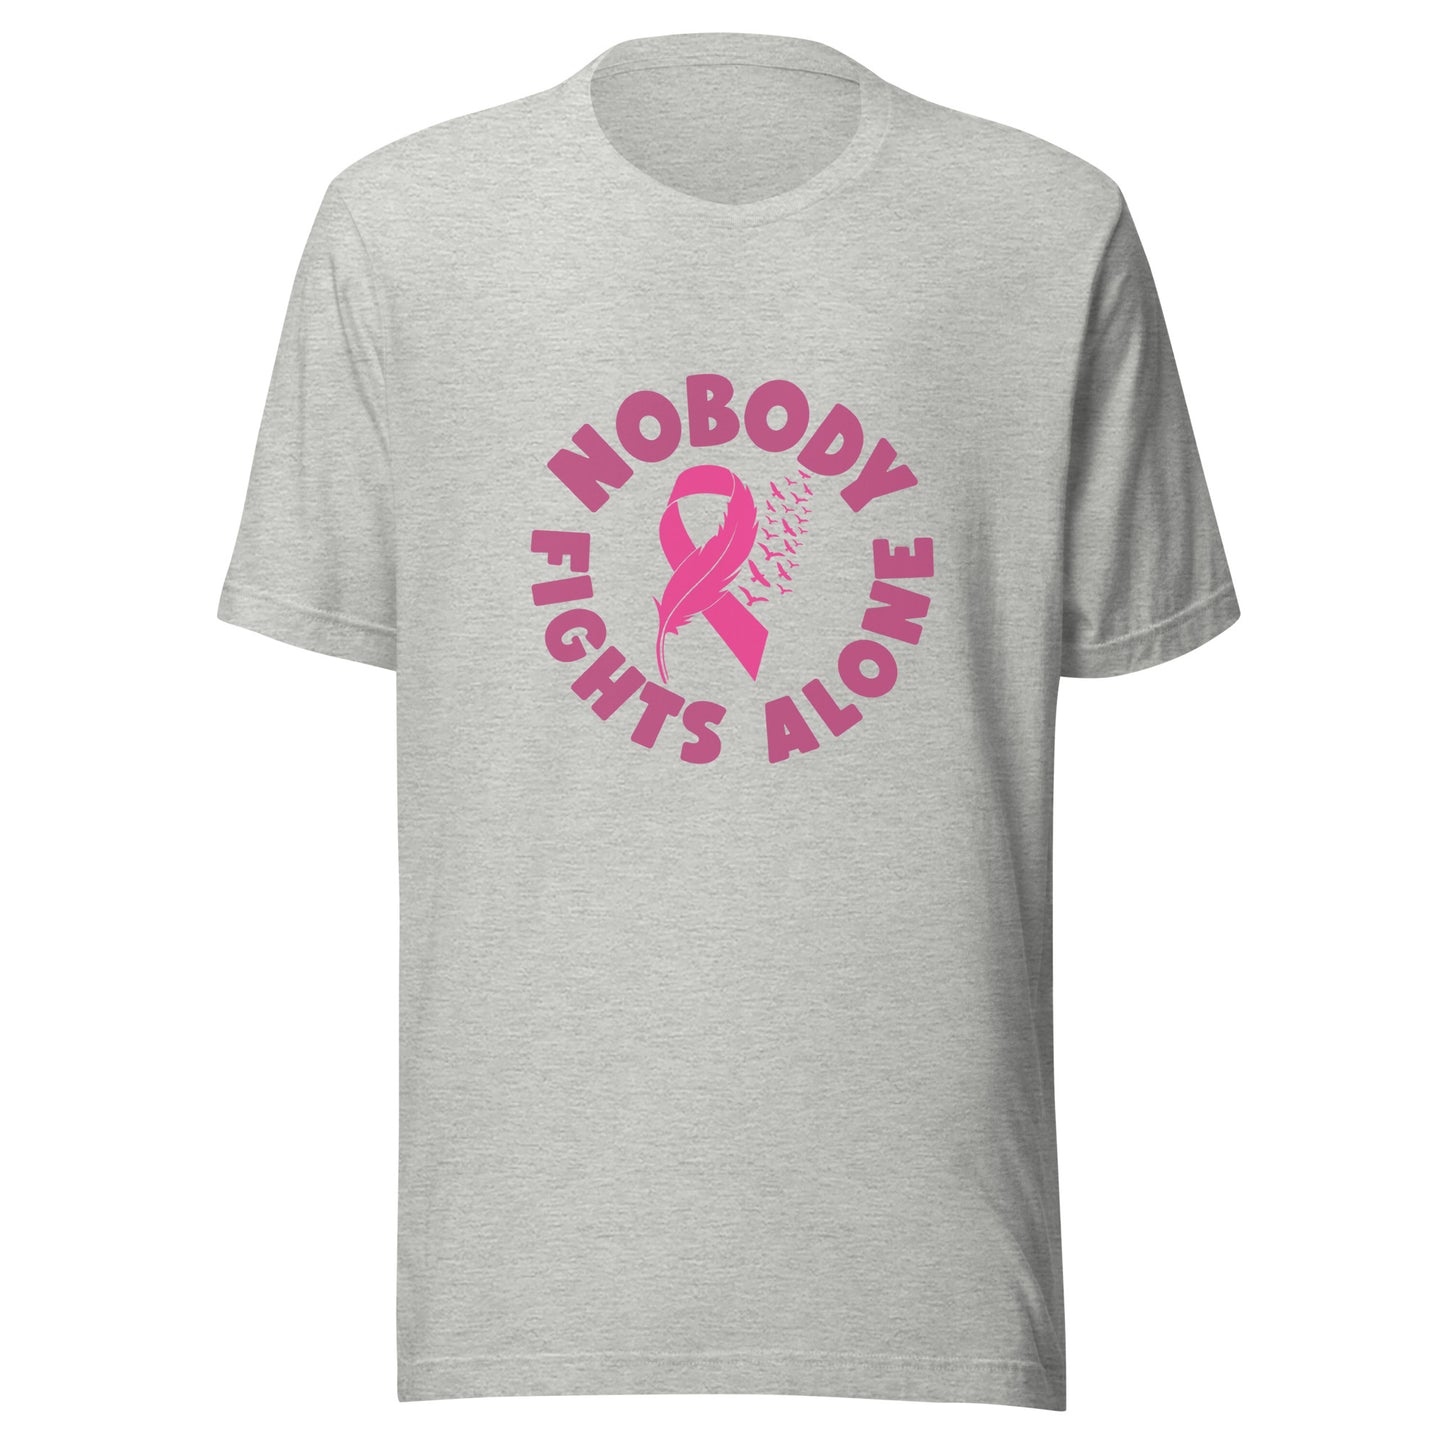 Nobody Fights Alone - Breast Cancer Awareness Pink Cancer Ribbon Unisex T-shirt